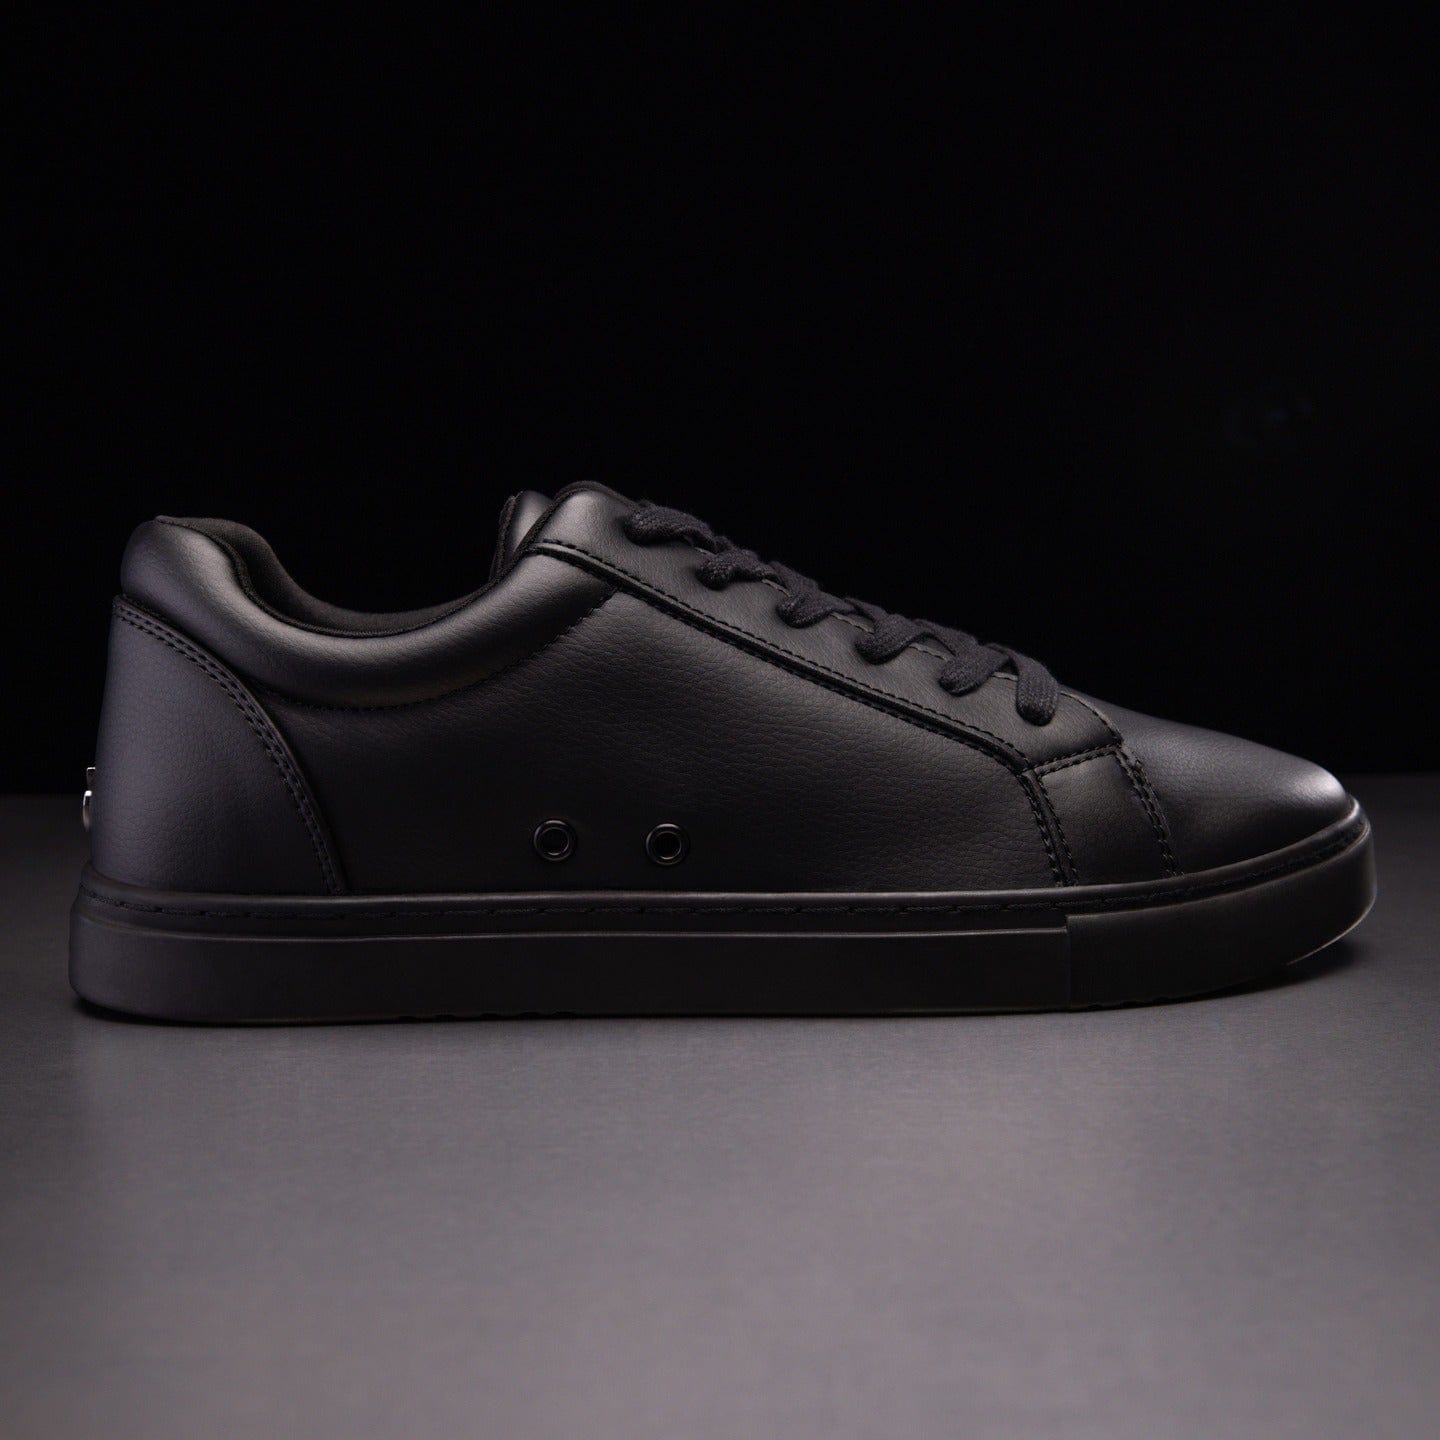 Trendy Fashion Ideas for Women's Sneakers: Black Sneakers in Focus - Oliver  Cabell